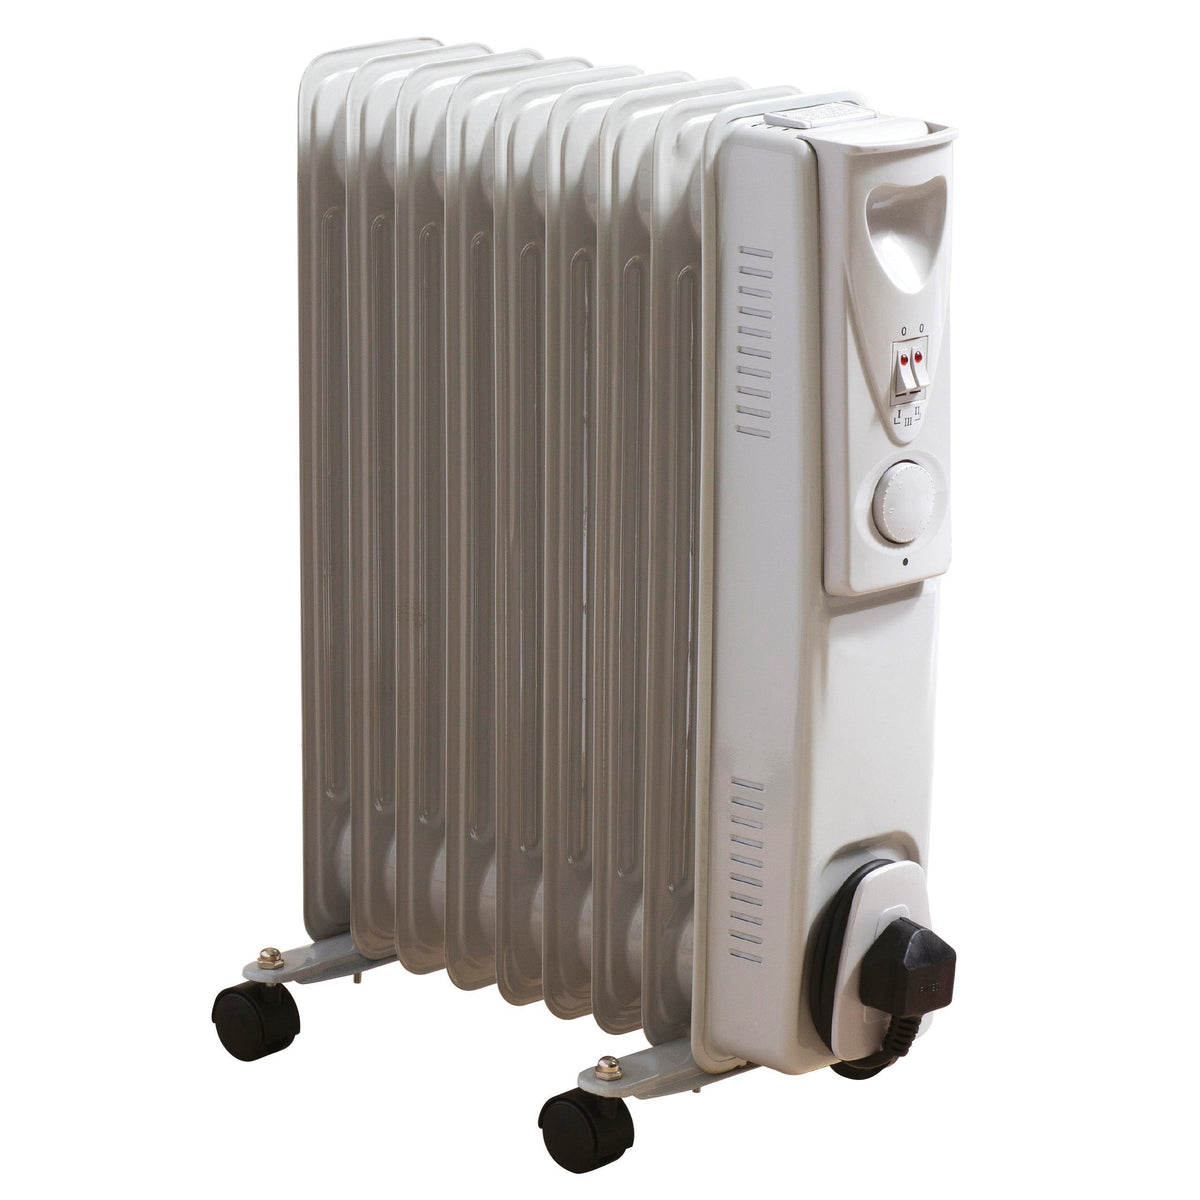 Daewoo Oil Filled Portable Radiator | 2000w - Choice Stores